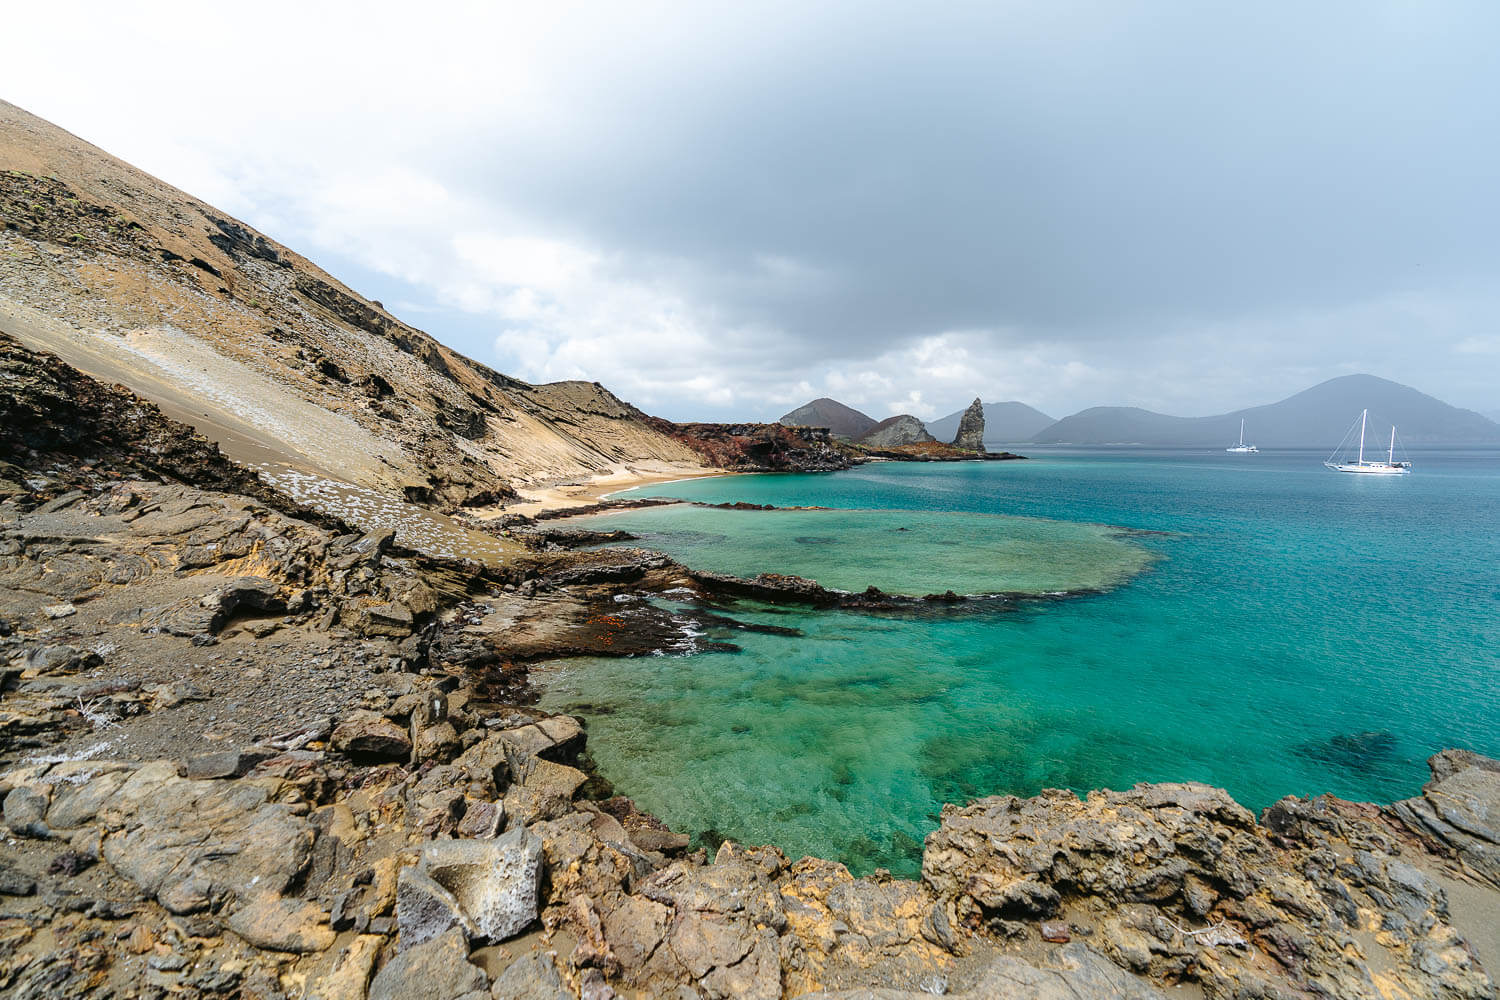 The pools at Bartolome island, one of the best Galápagos Islands tours.